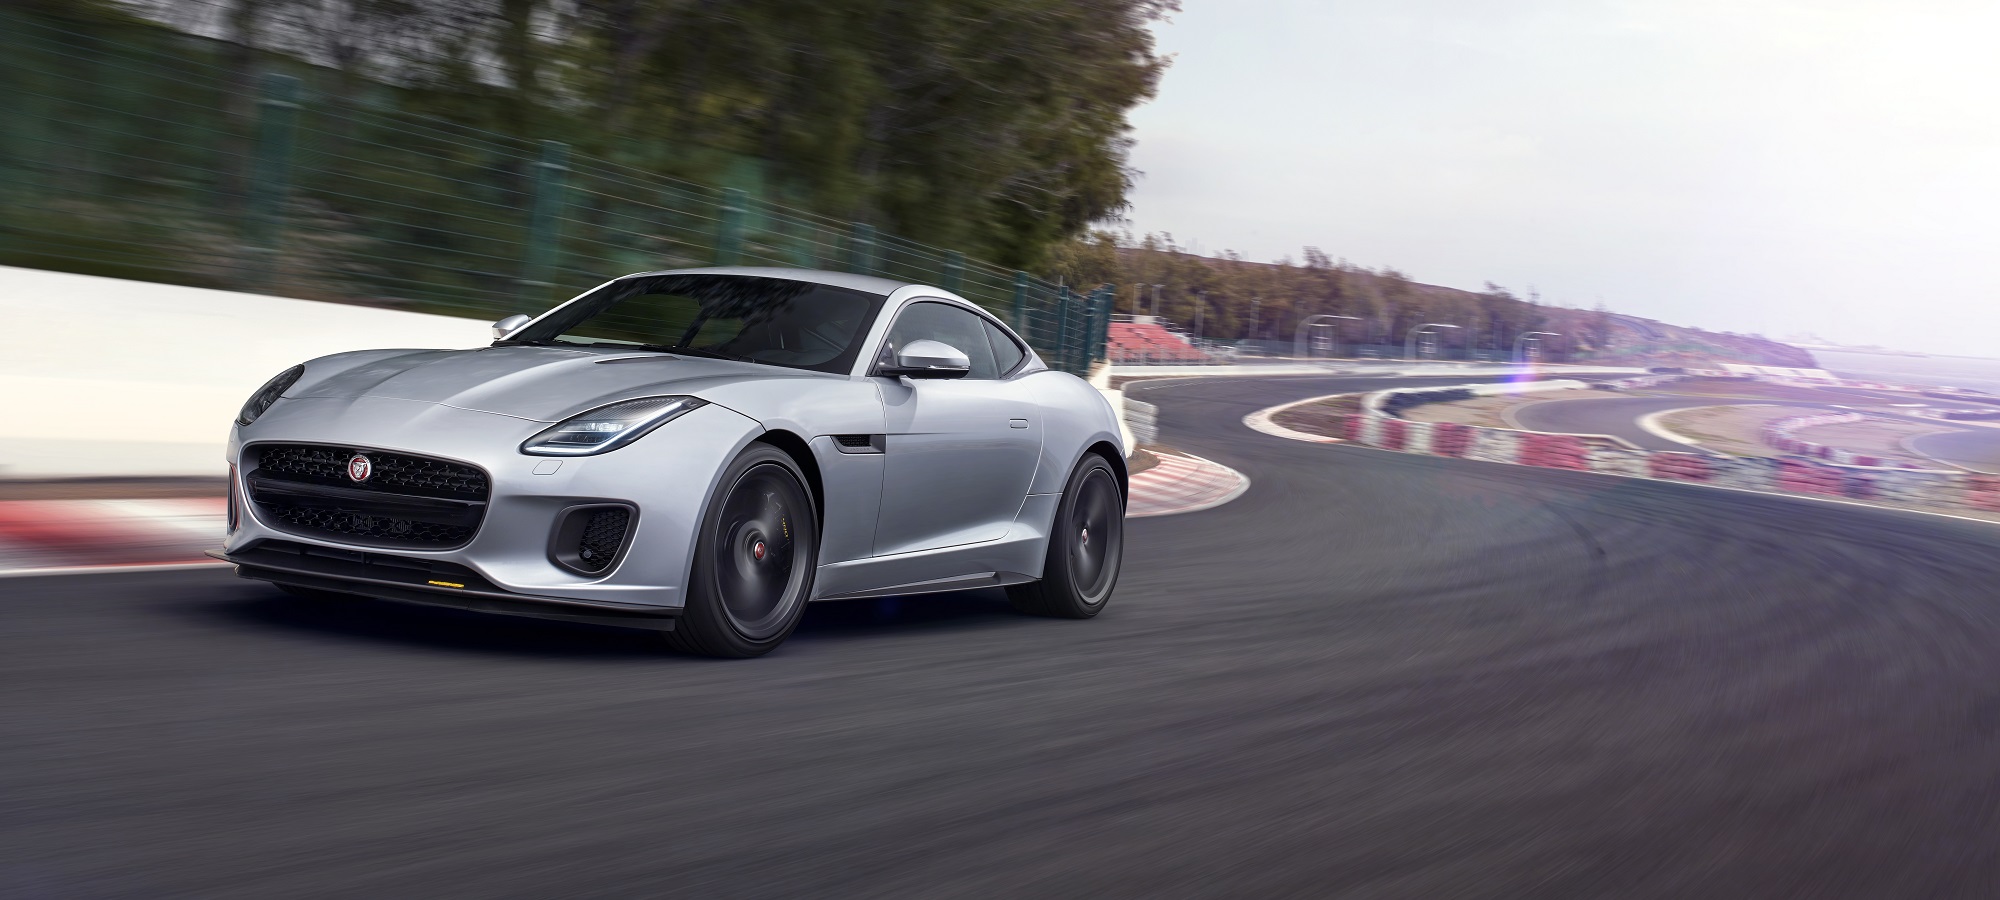 The Jaguar F-Type R AWD is an alternative to the Corvette with supercar credentials.